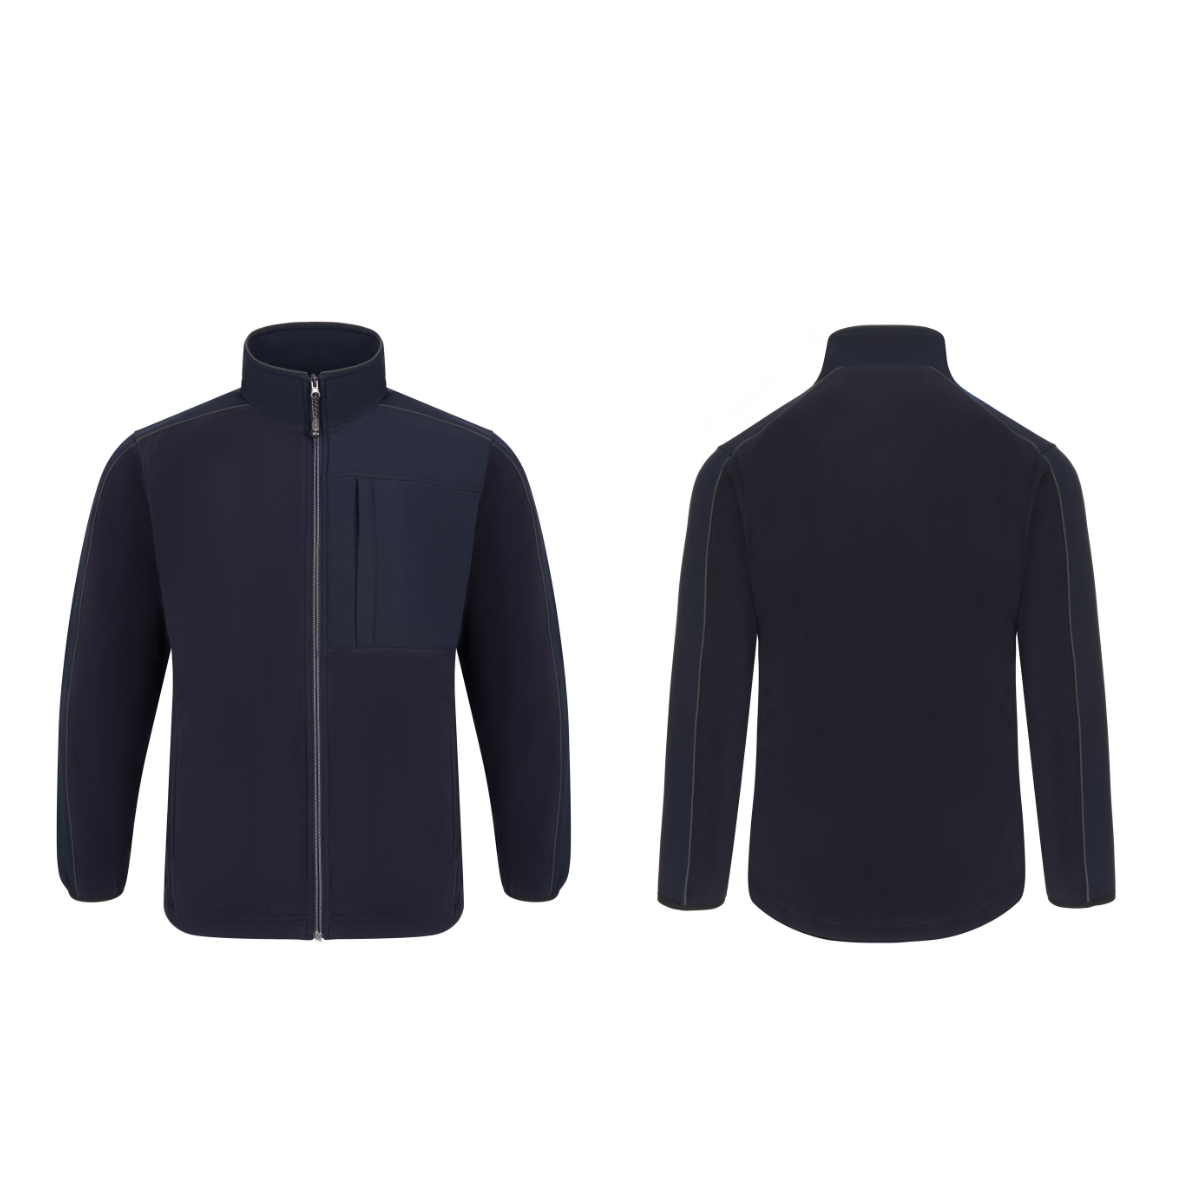 Eco Drift switches to 100% recycled workwear fleeces